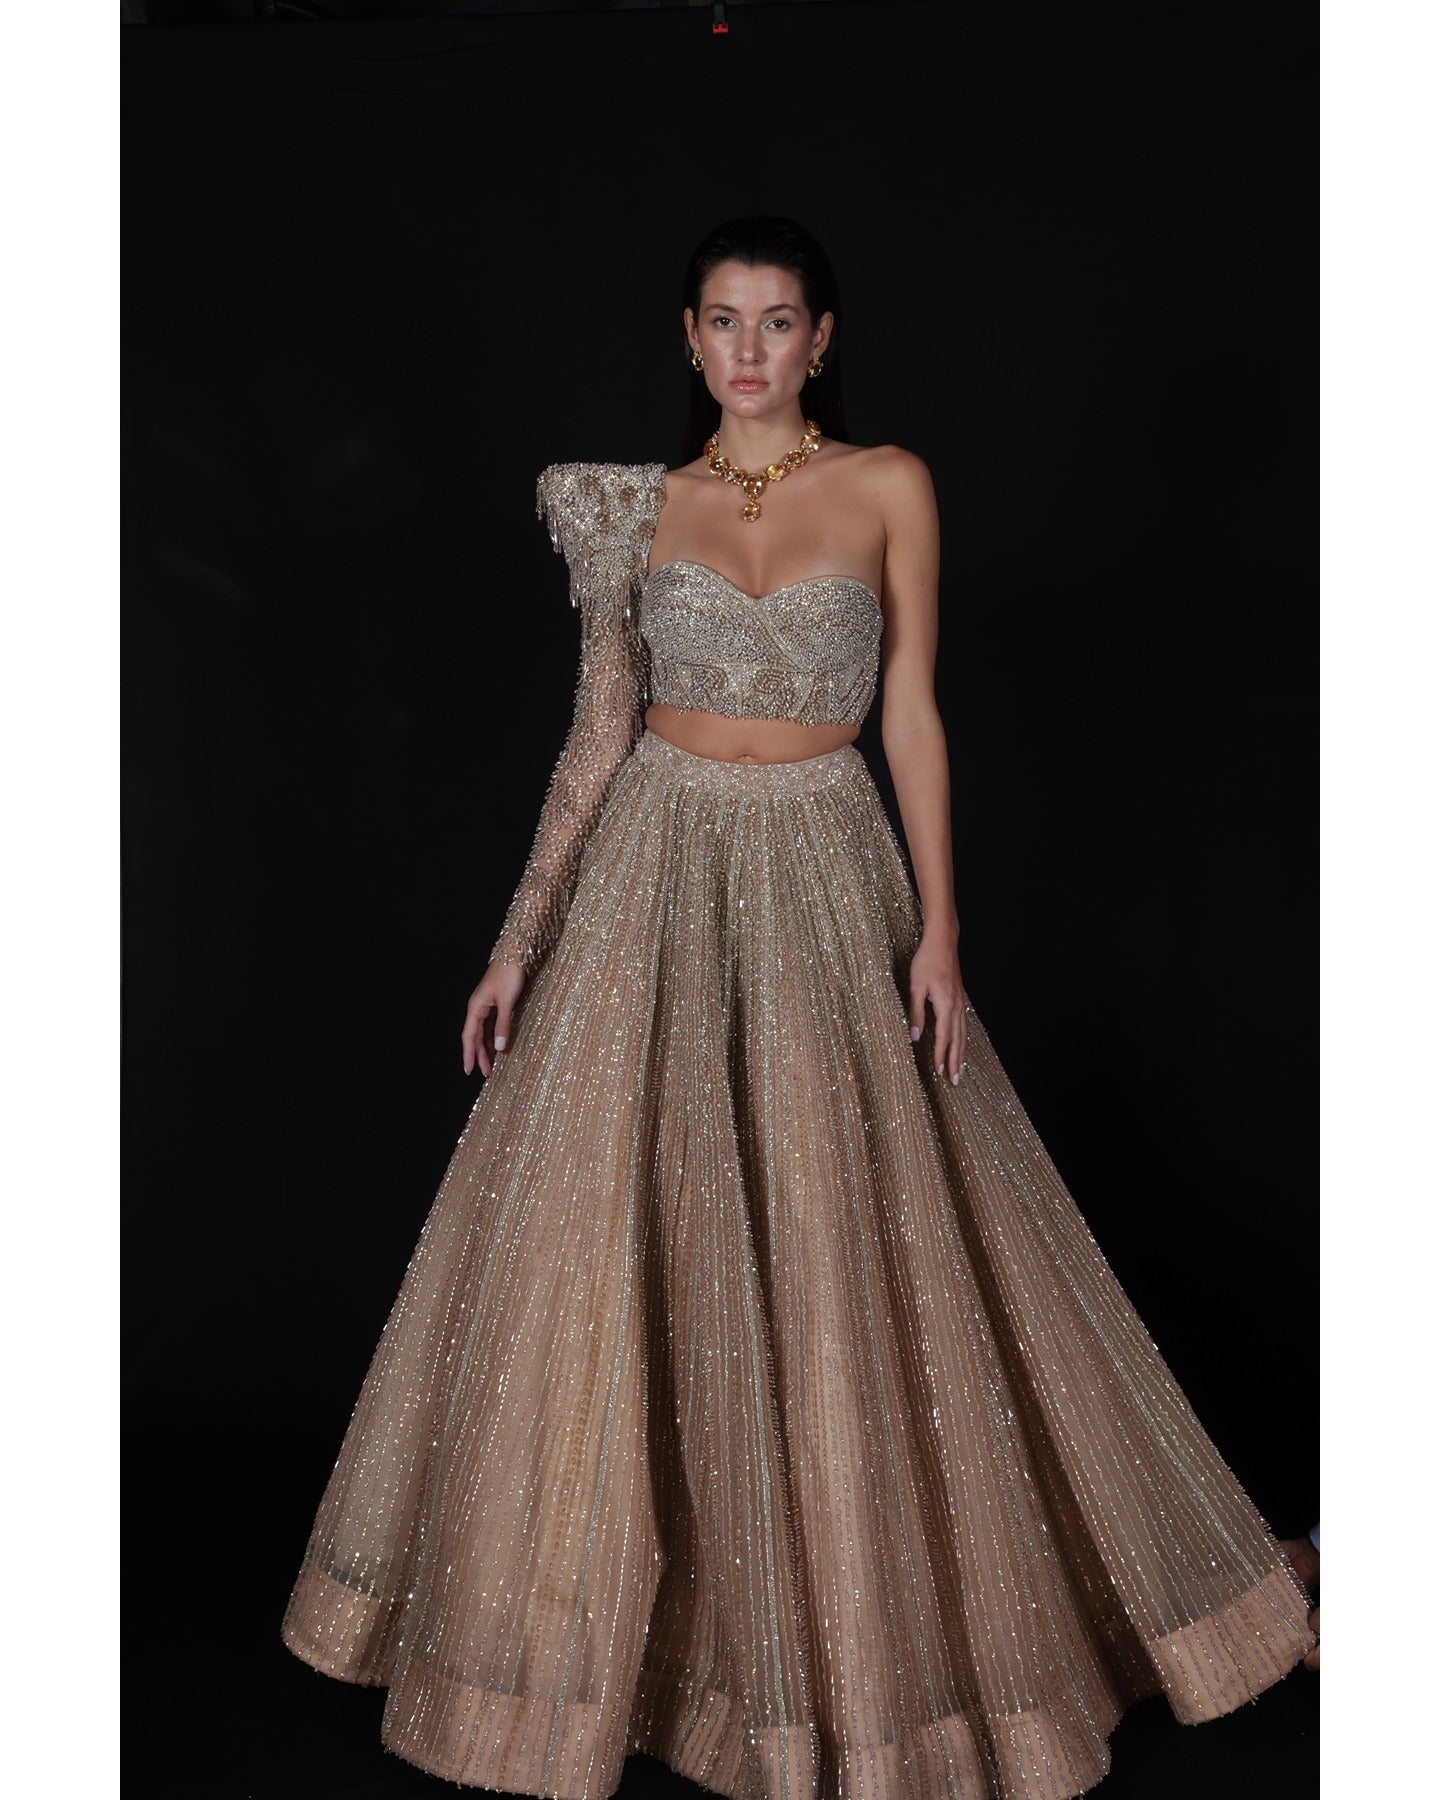 Elevate your elegance in our Champagne Lehenga, a sparkling symphony of stones, crystals, sequins, and Japanese cut-dana.